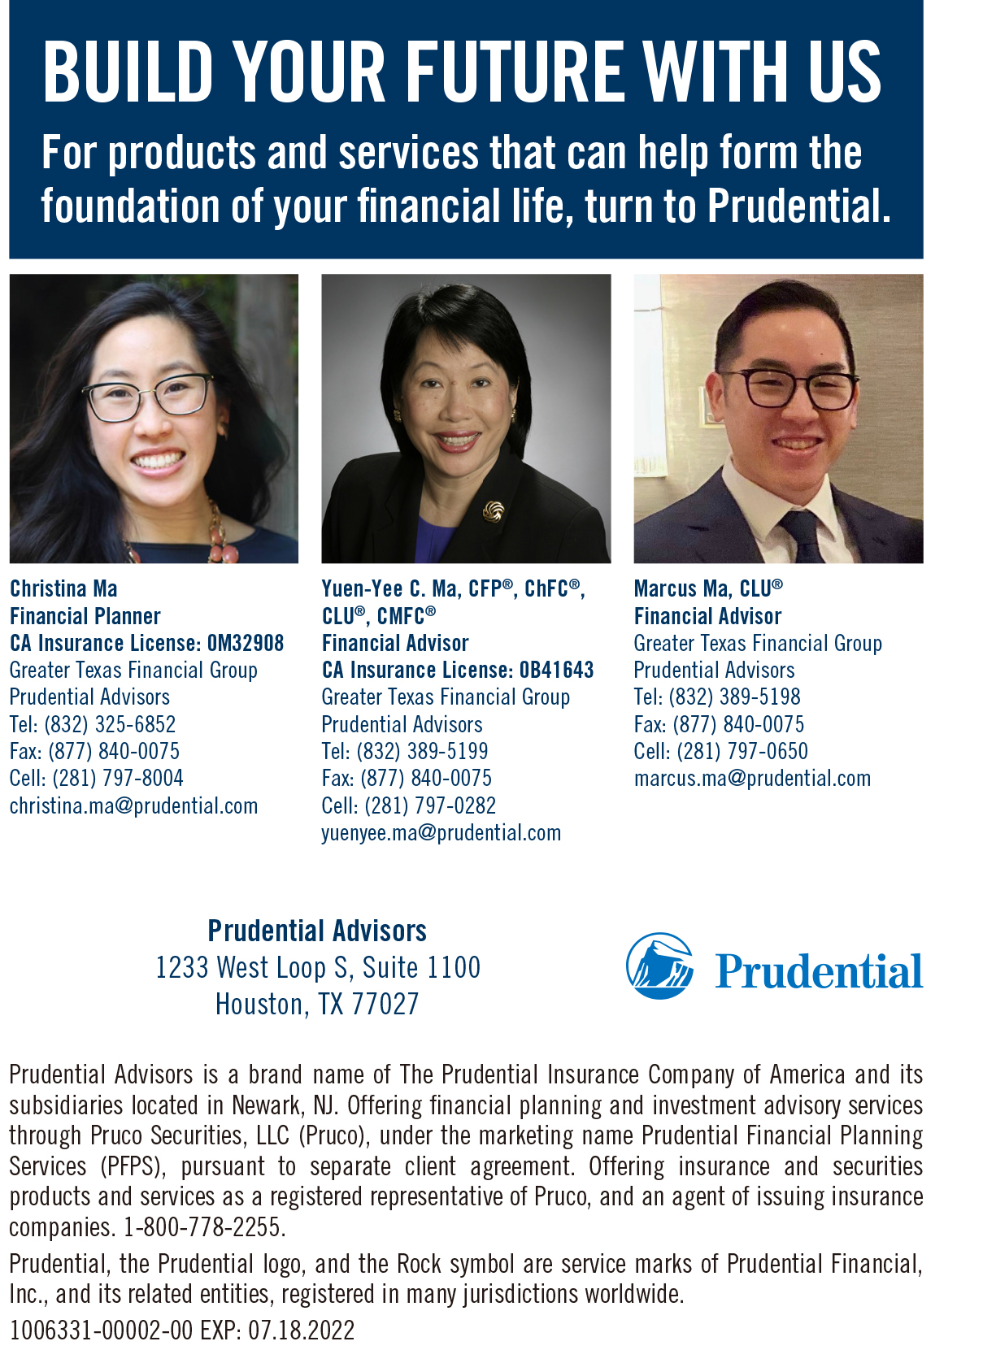 PRUDENTIAL INSURANCE 保德信